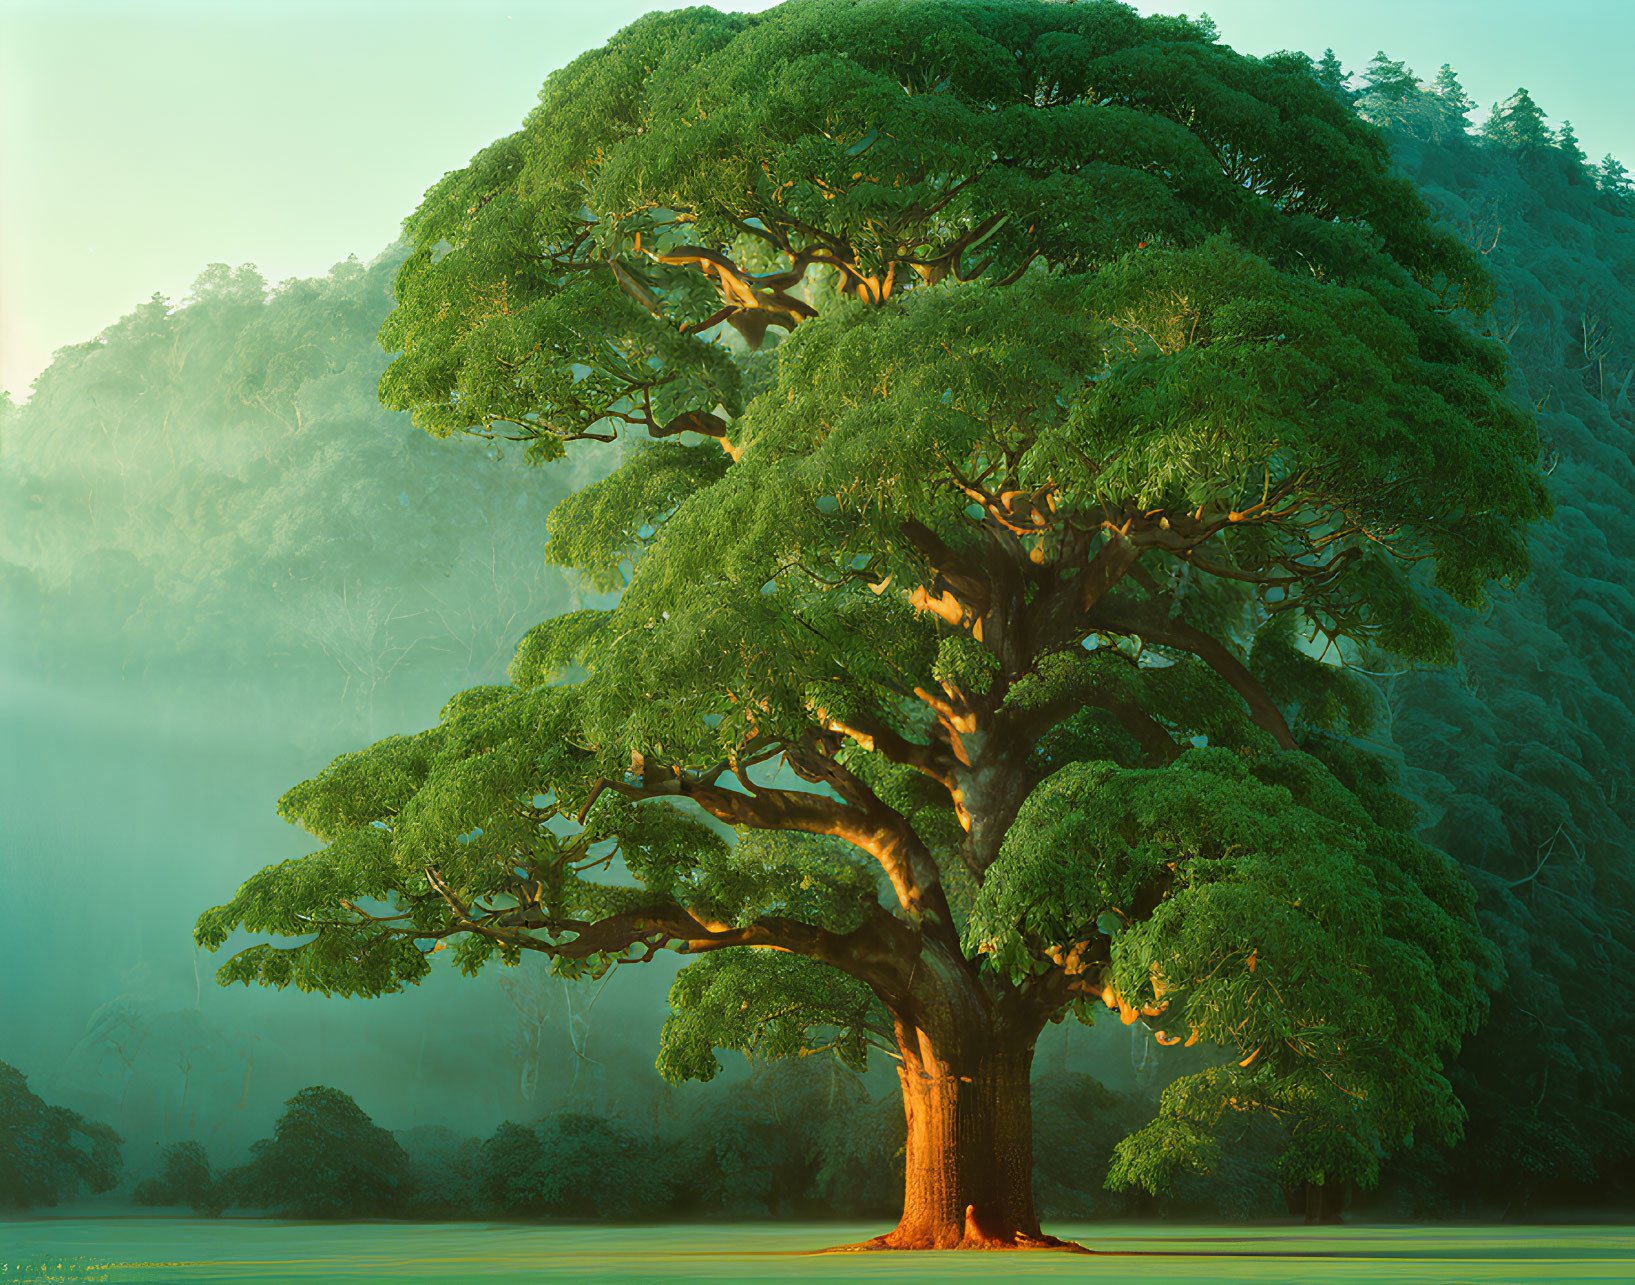 Majestic solitary tree with broad canopy in misty forest under warm sunlight